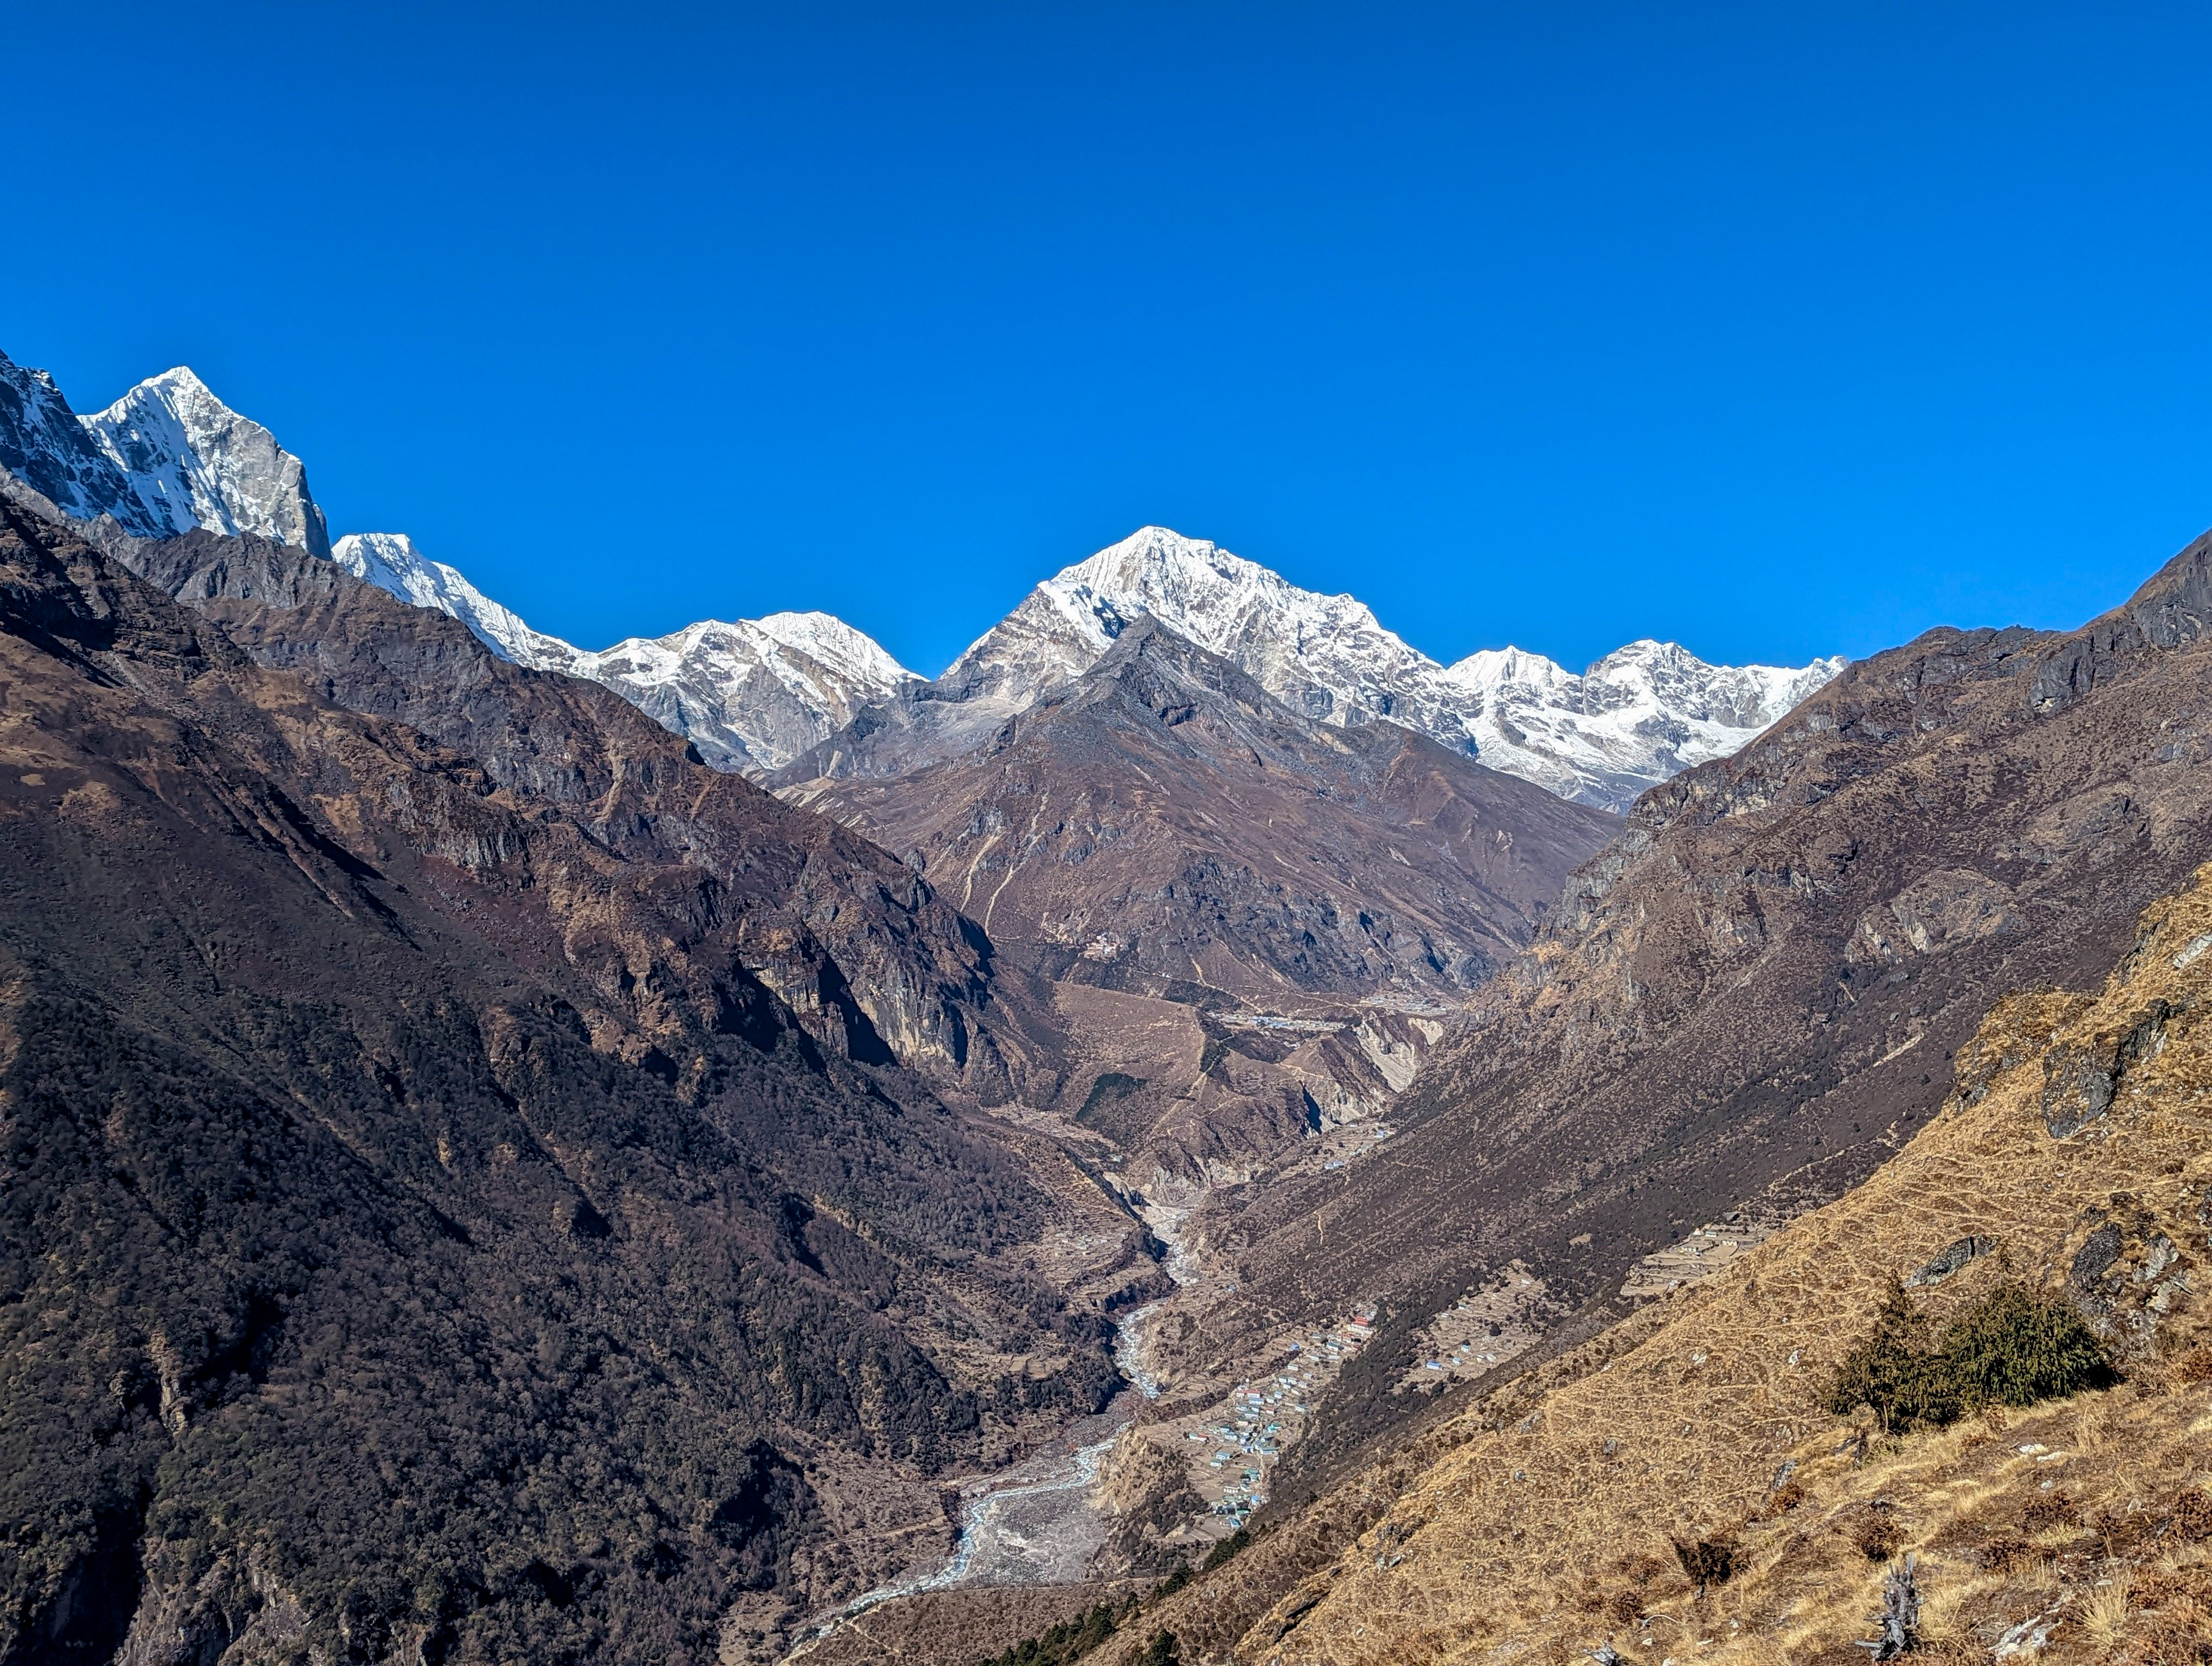 8:45 – 9:00 AM: Fly to Syangboche (Everest View Hotel) (3,950 meters)